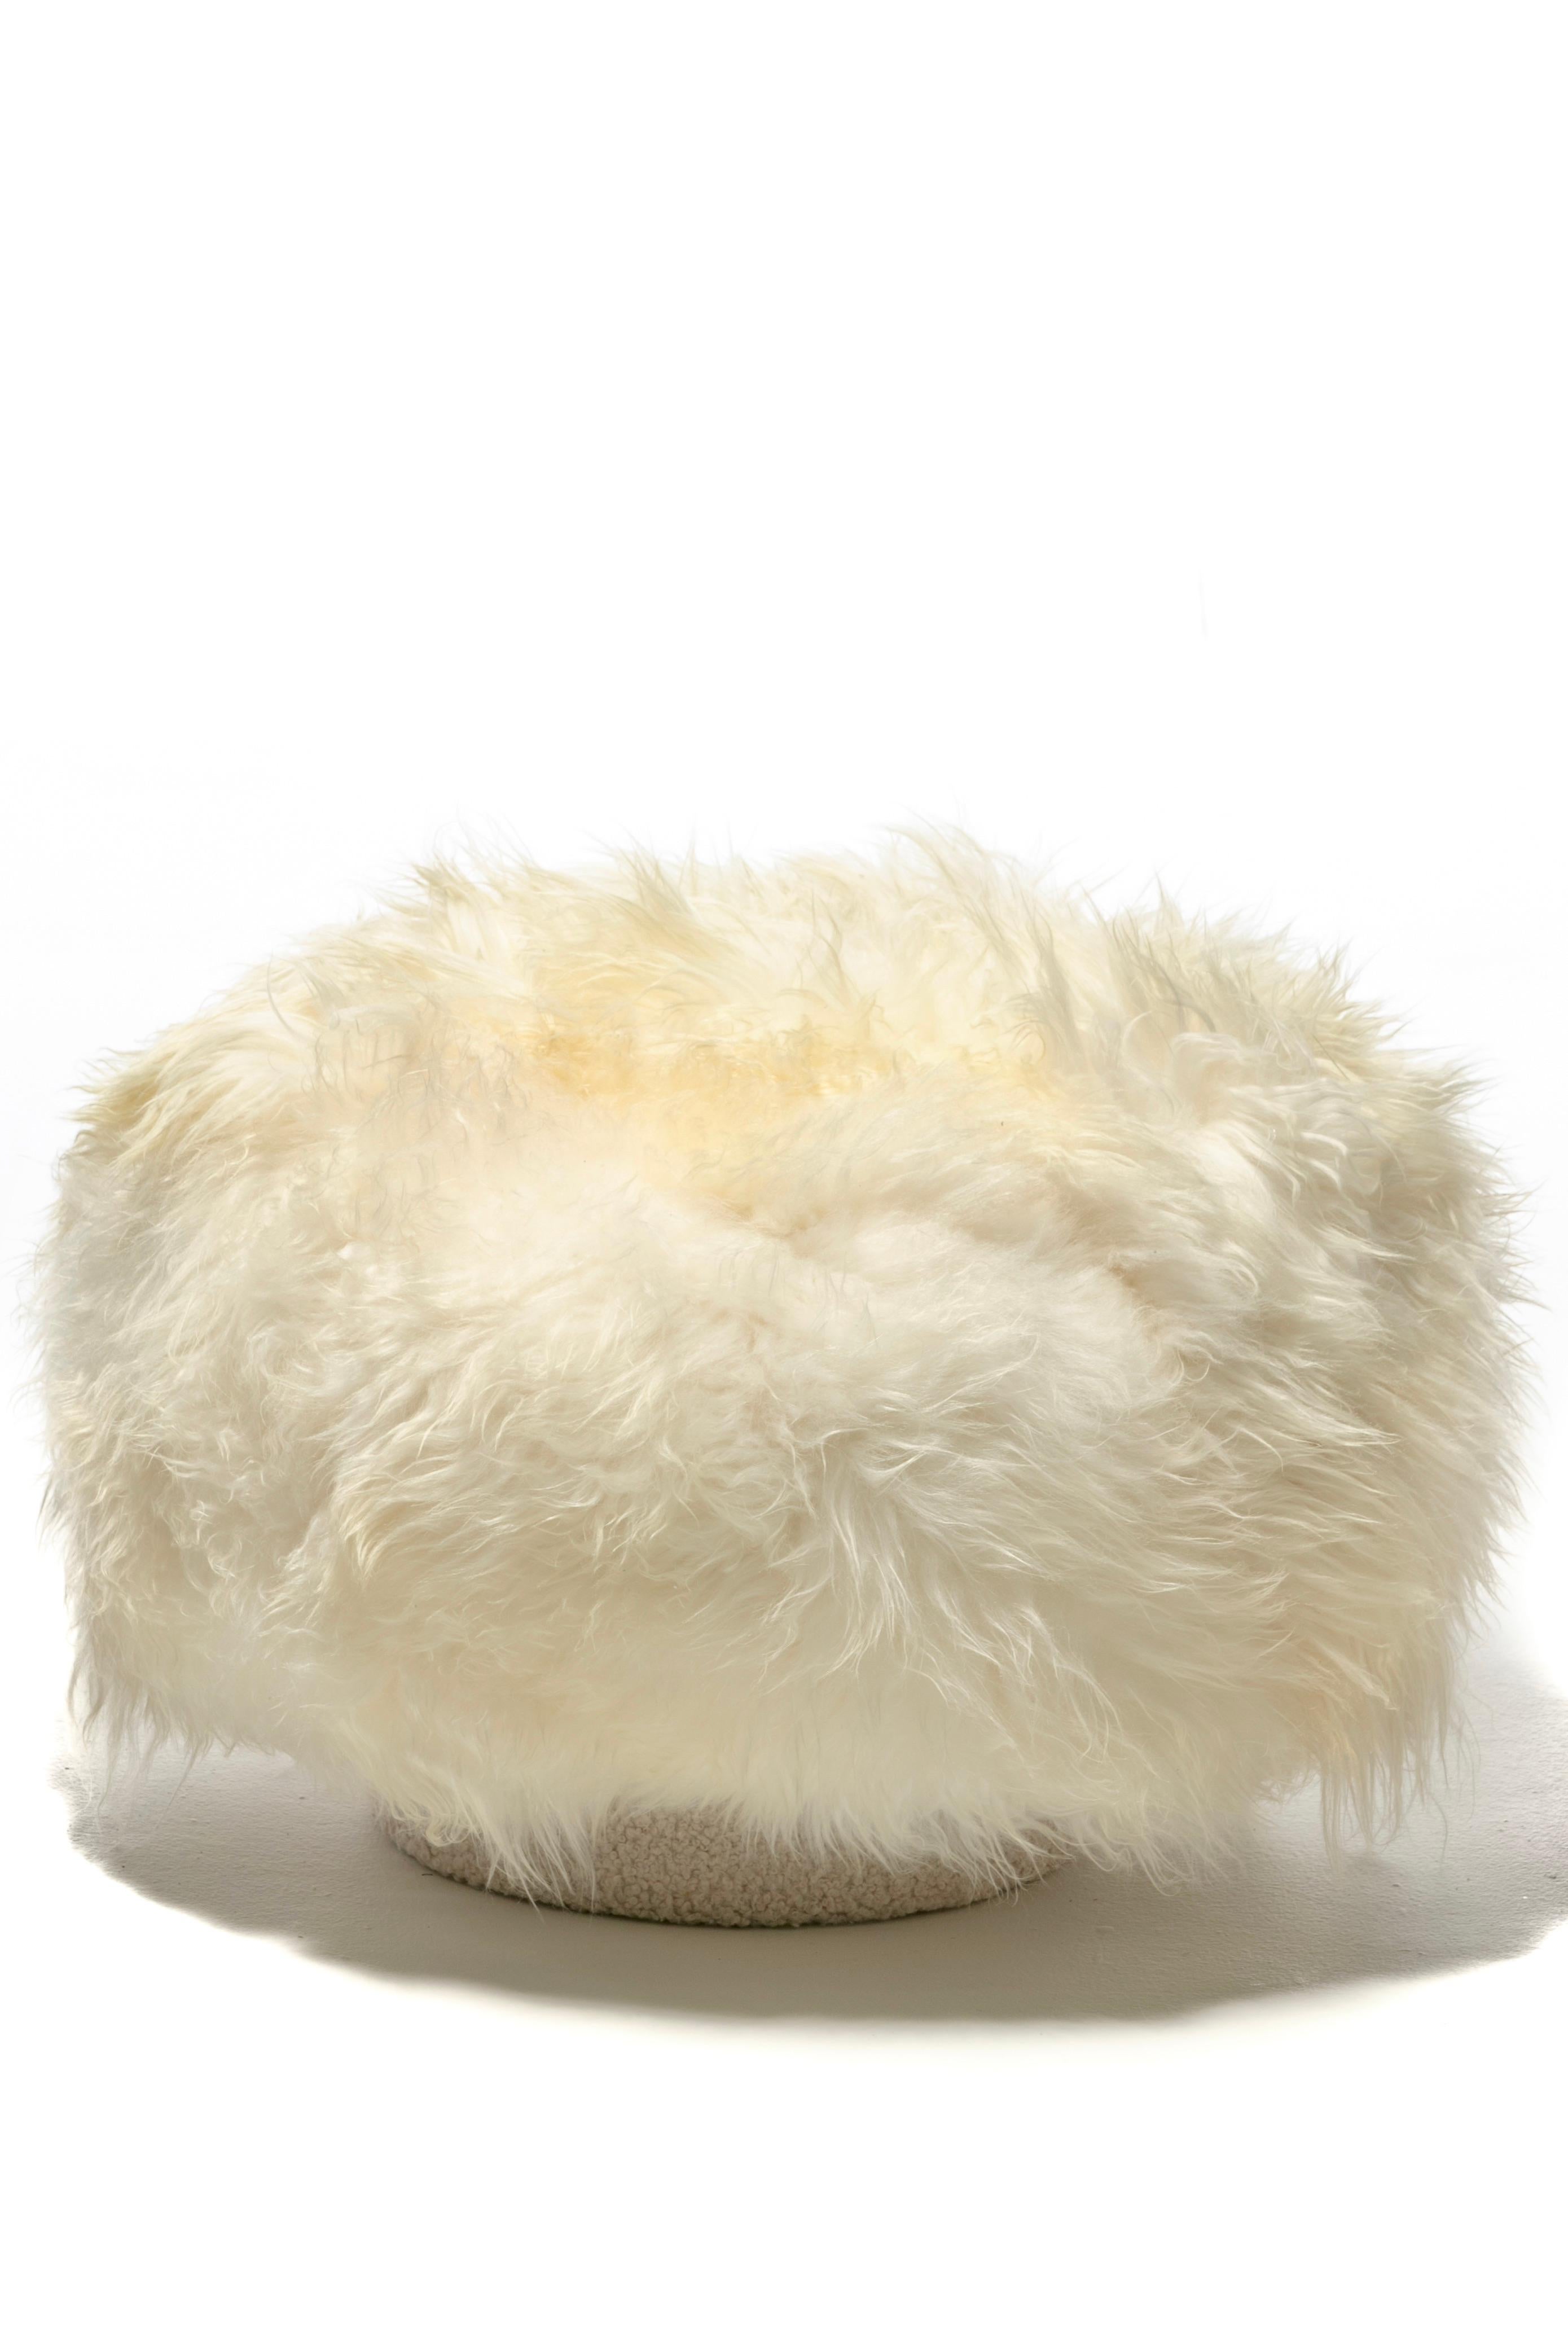 1970s Swivel Mushroom Top Pouf Ottoman in Ivory White Icelandic Sheepskin In Good Condition For Sale In Saint Louis, MO